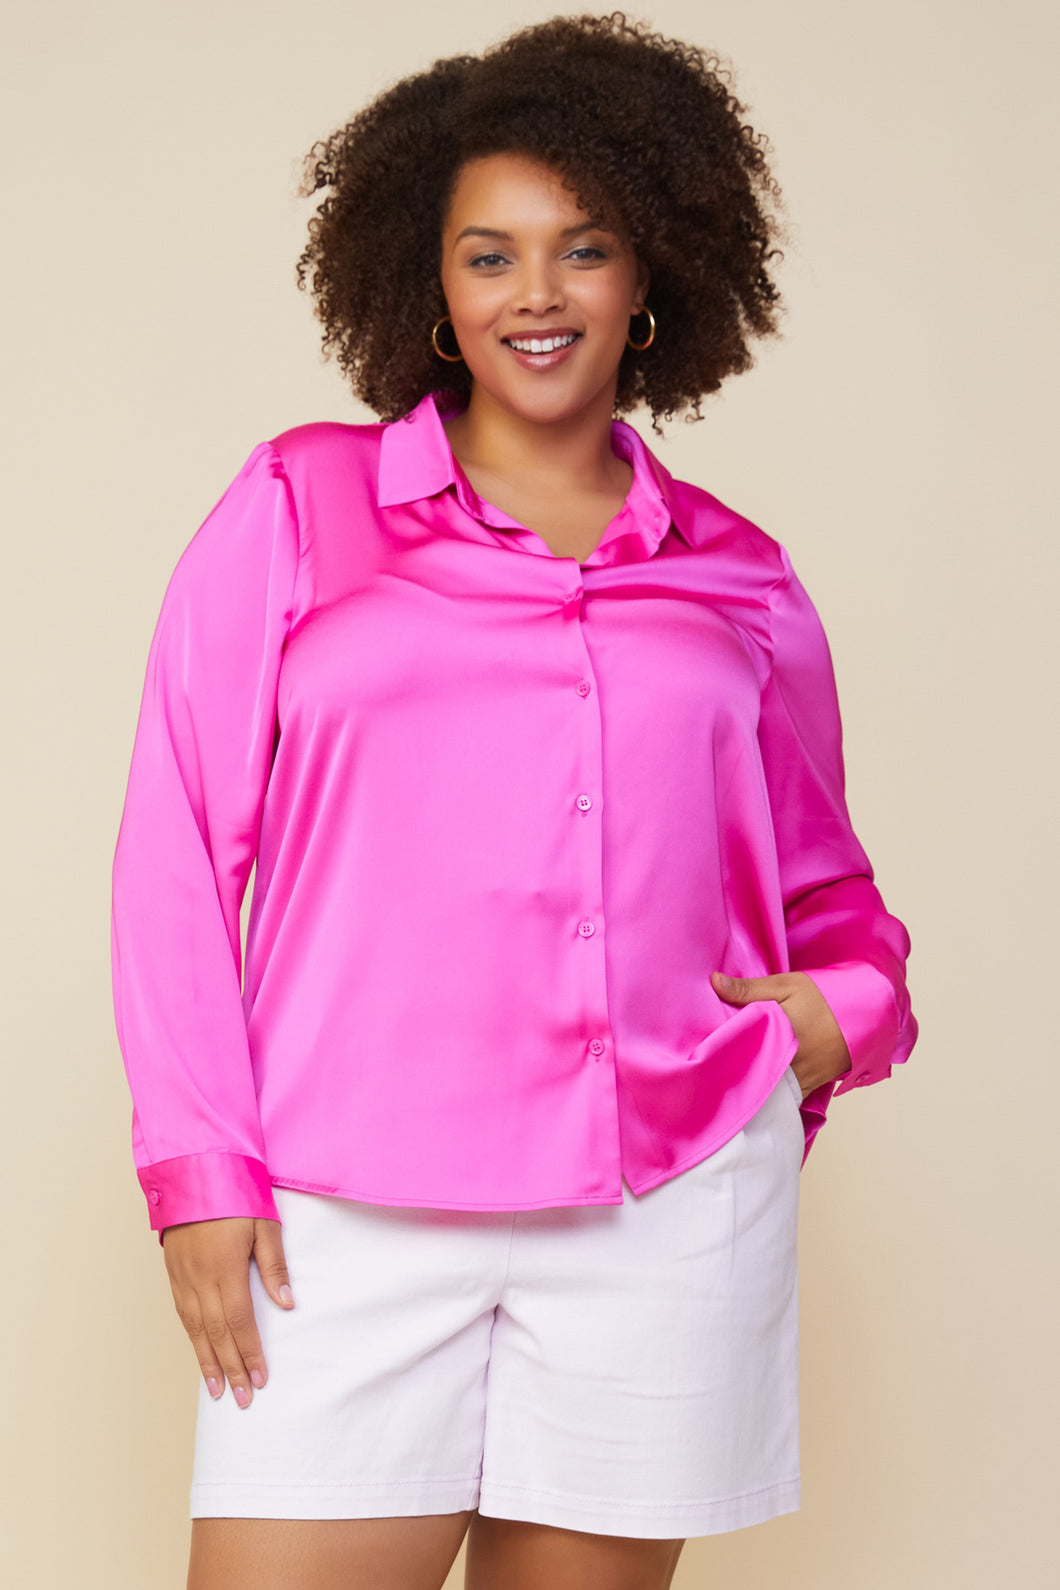 Beautifully You Neon Pink Blouse - Curvy